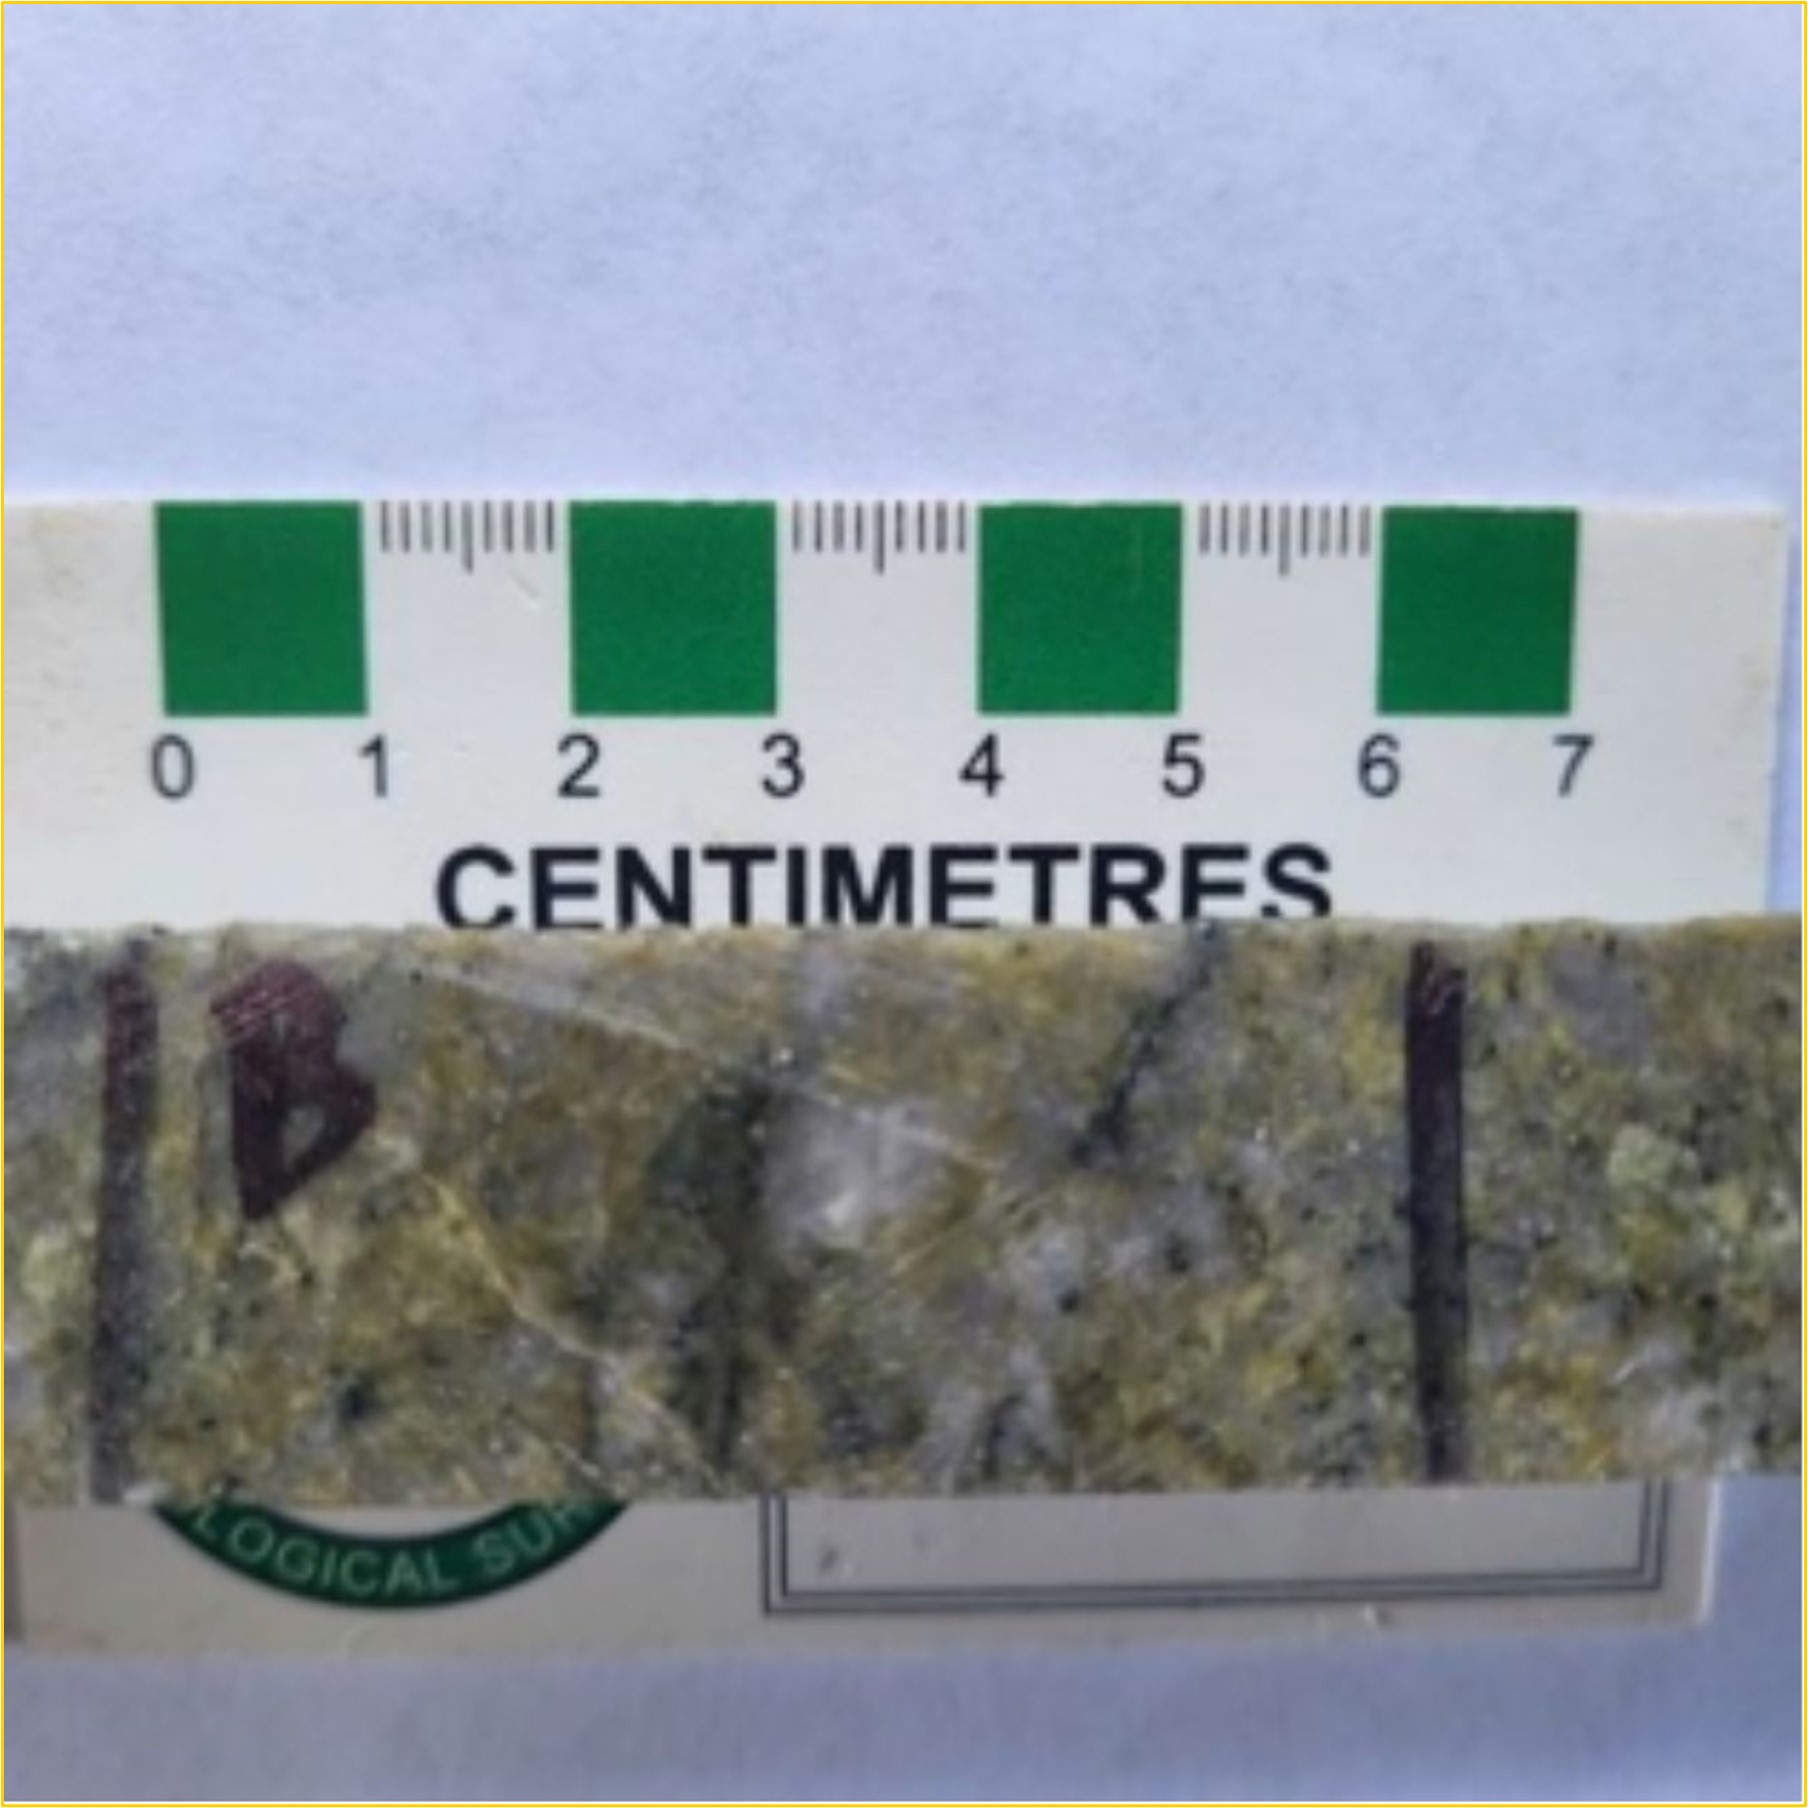 Drill core from 20MT_002 showing hydrothermally altered granodiorite. There is a phyllic style of alteration that consists of green muscovite (phengite), gray quartz, and fine-grained disseminated pyrite cross-cut by millimetre-scale dark green chlorite veinlets and greyish white millimetre scale carbonate veinlets.